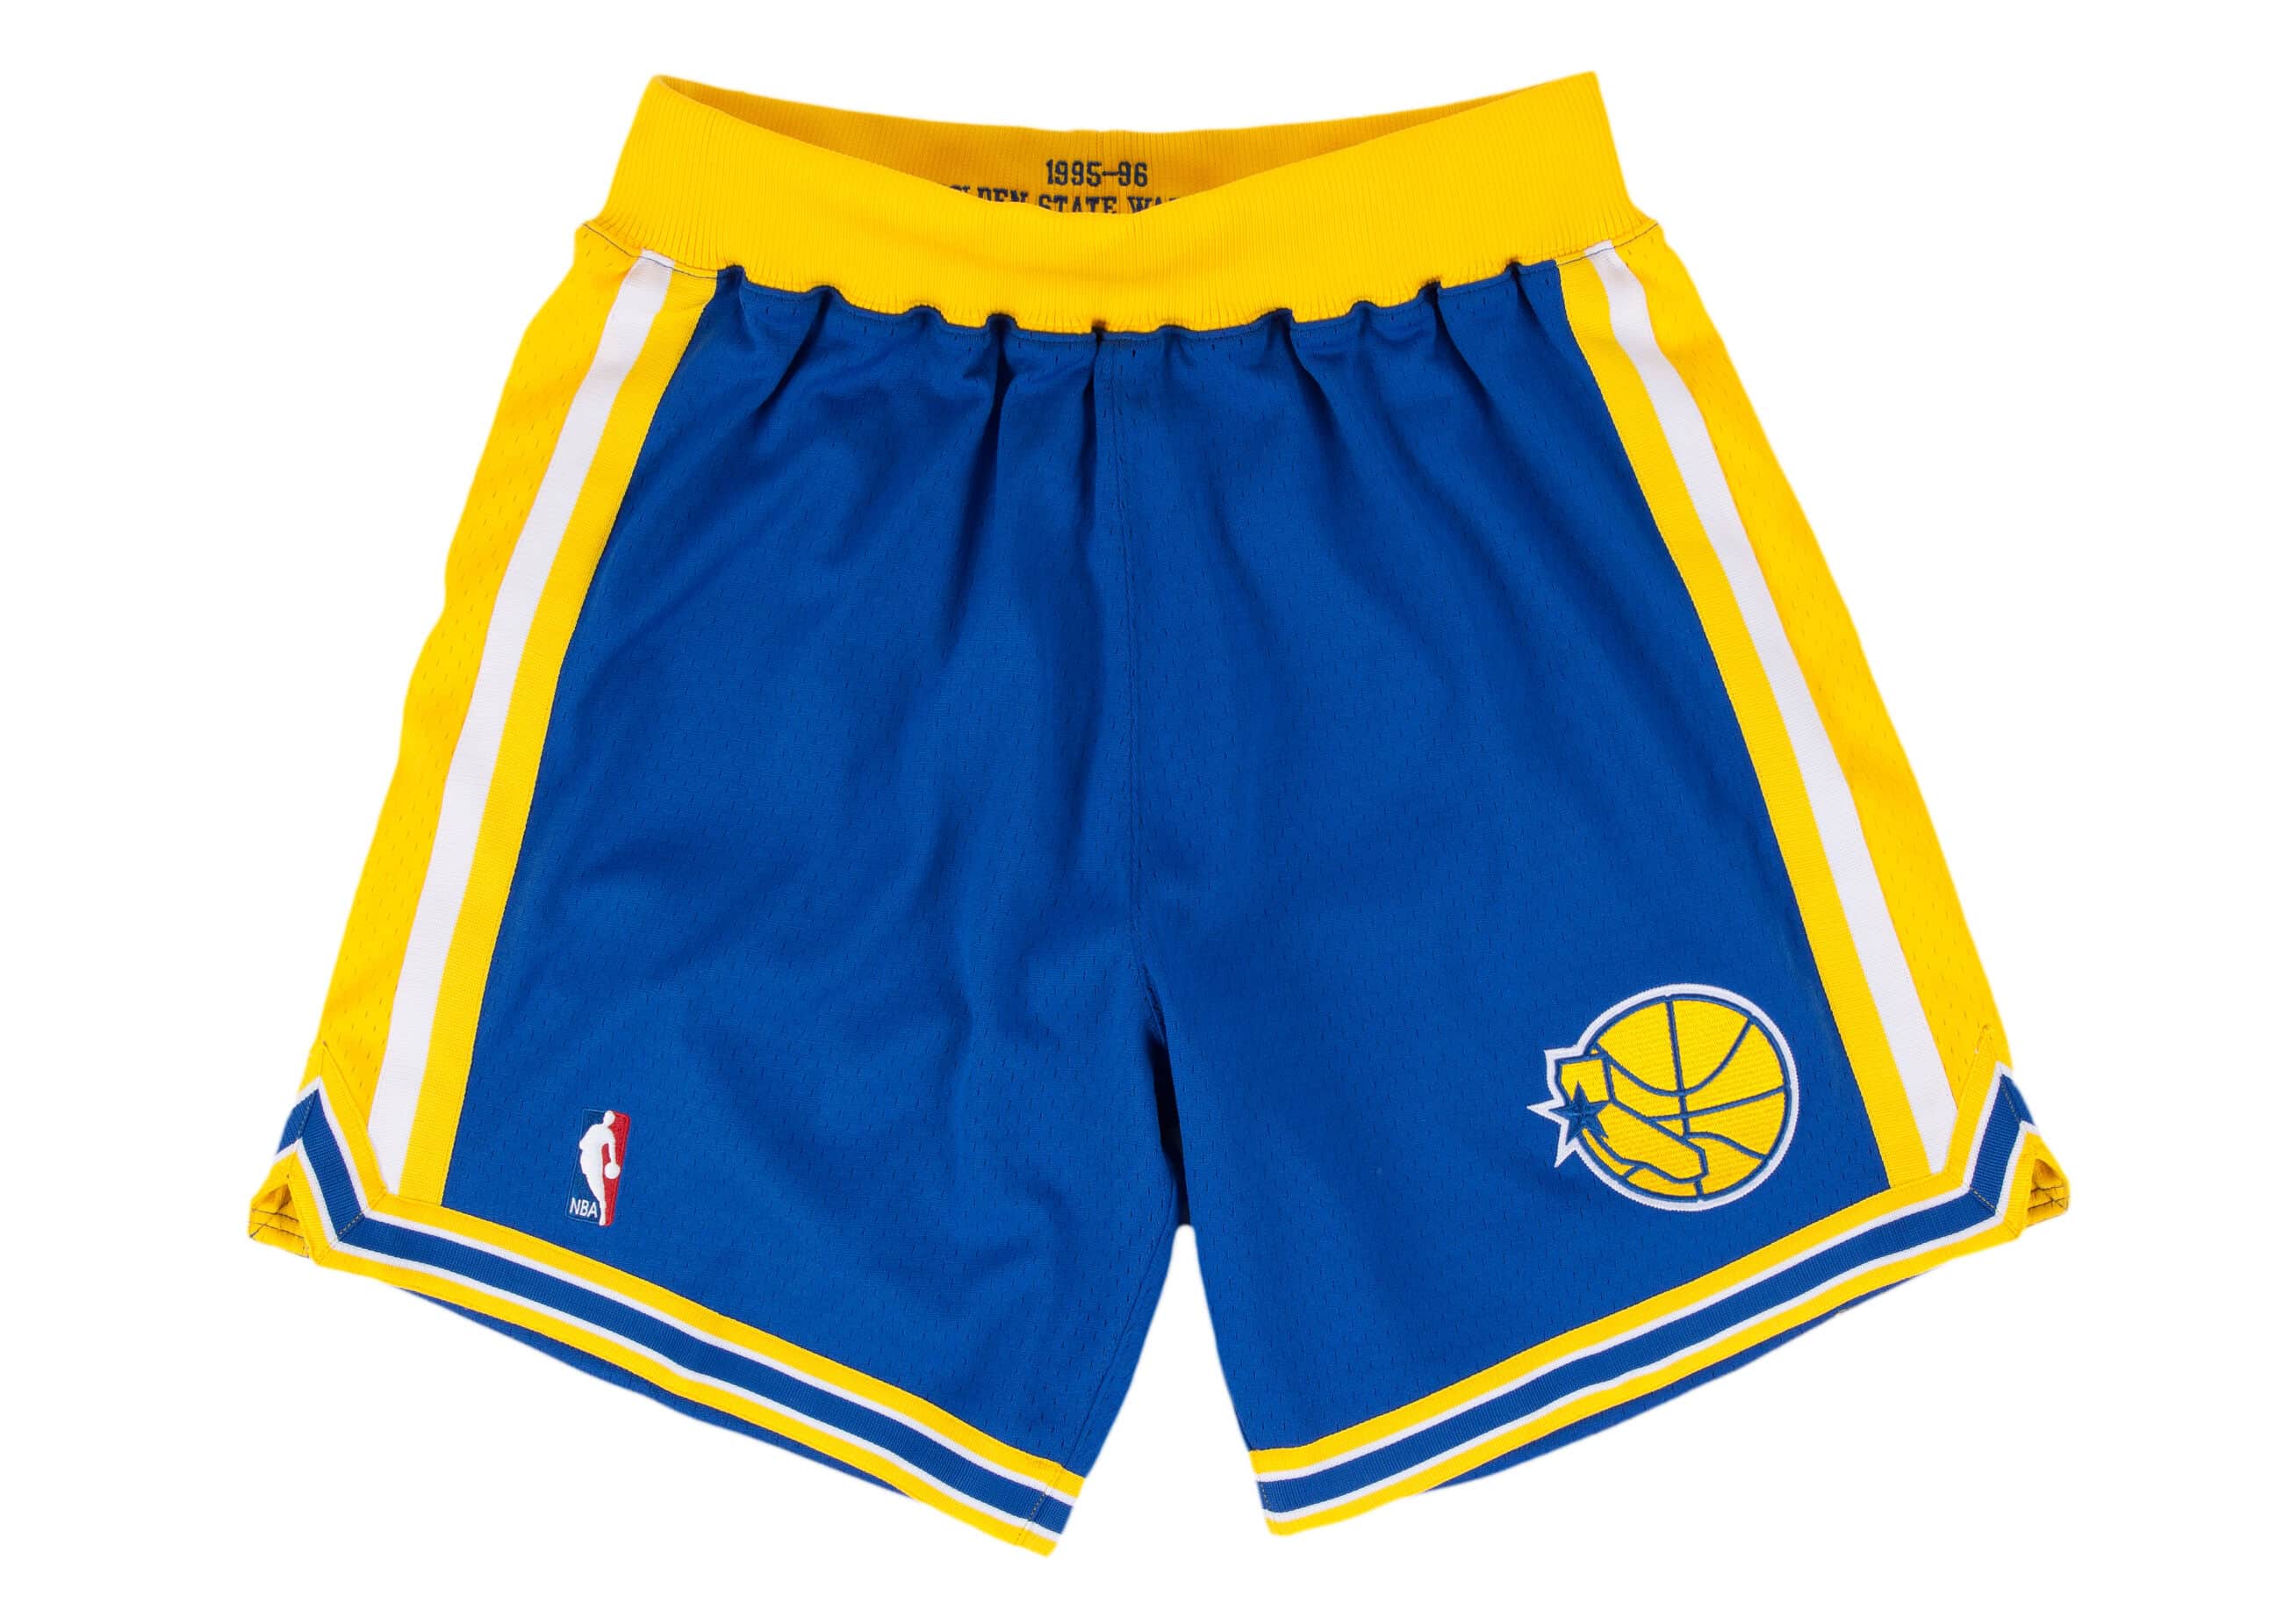 NBA Golden State Warriors Throwback Basketball Game Shorts Gold Size 46+2+2